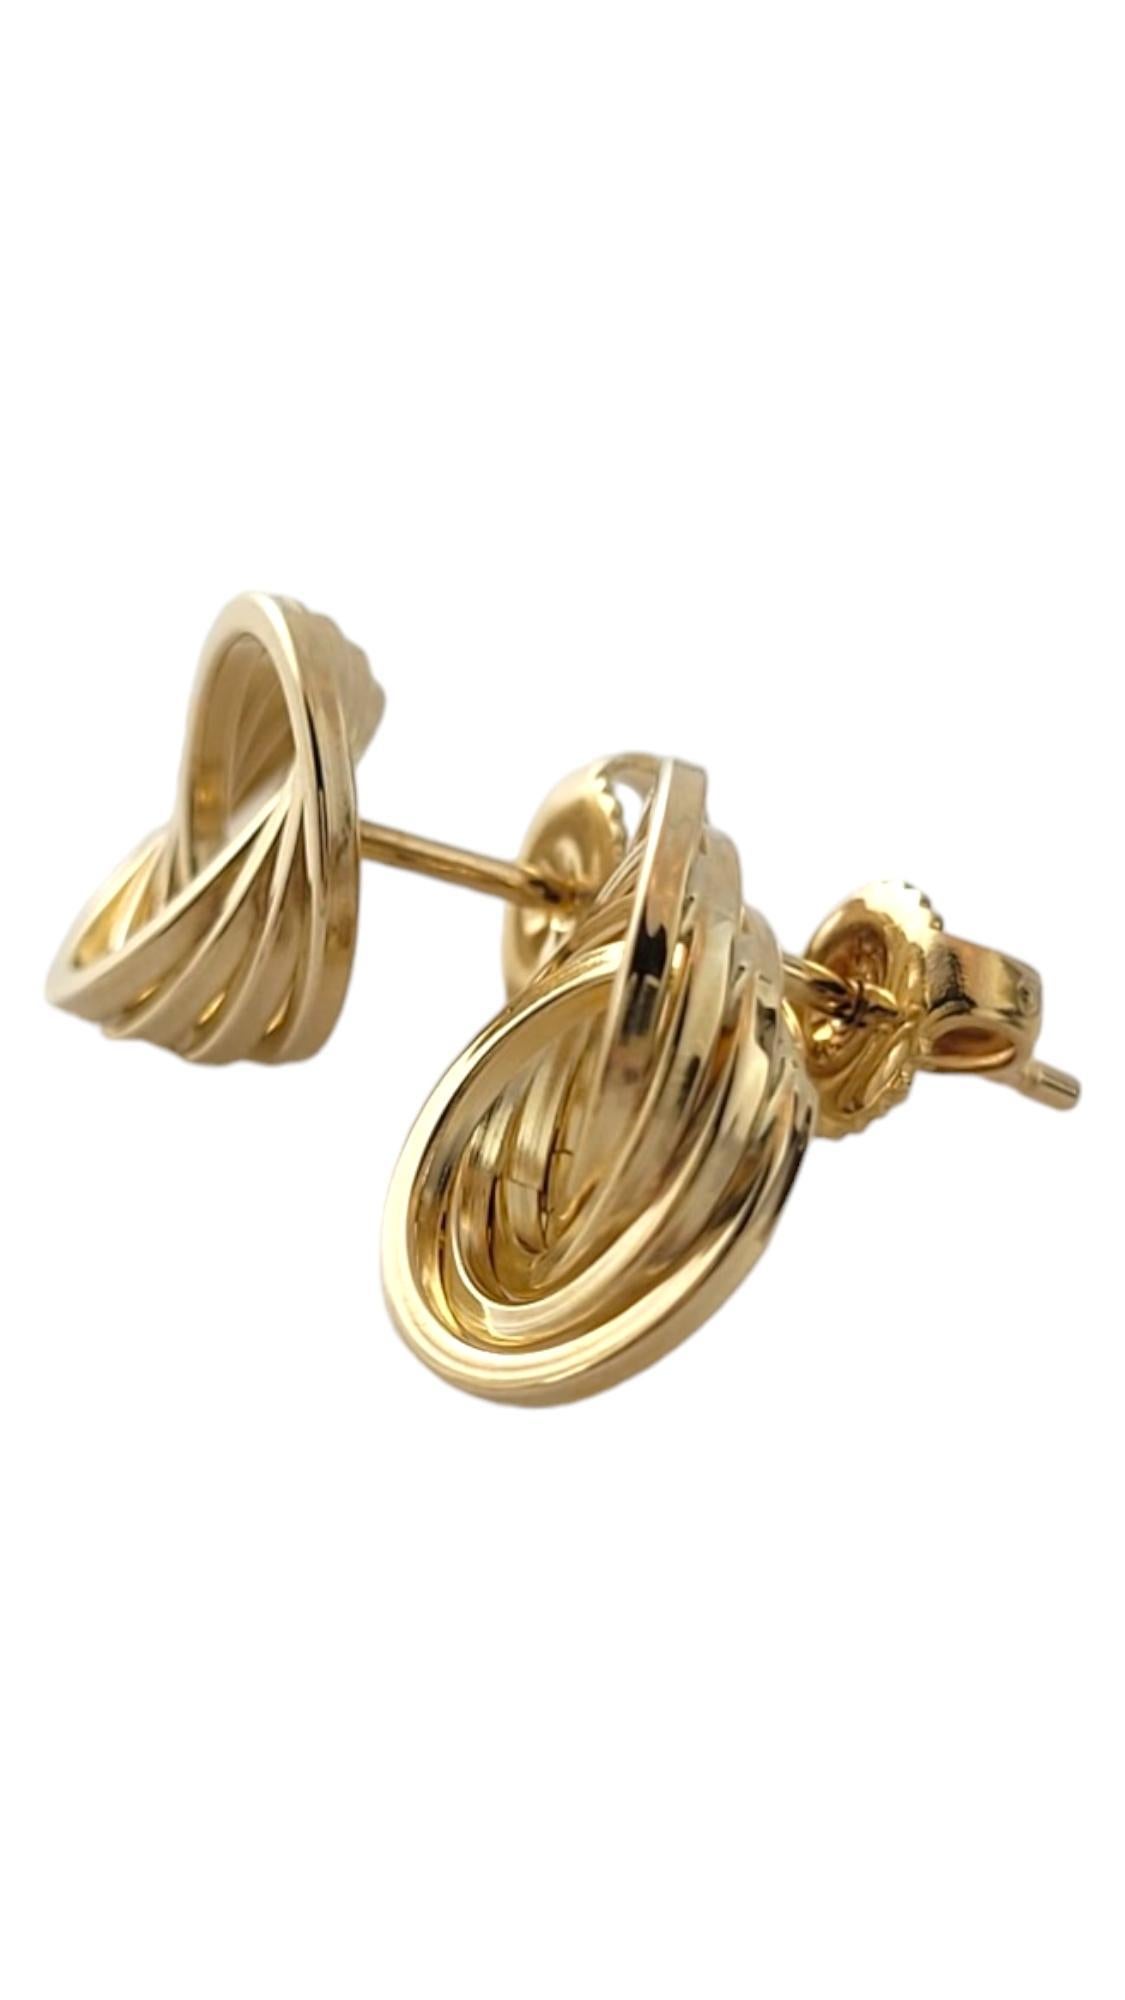 14K Yellow Gold Circle Knot Earrings #16875

These beautiful 14K gold circle knot earrings are going to look absolutely gorgeous on you!

Size: 13.7mm X 10.7mm X 3.7mm

Weight: 0.9 dwt/ 1.4 g

Hallmark: 585

Very good condition, professionally